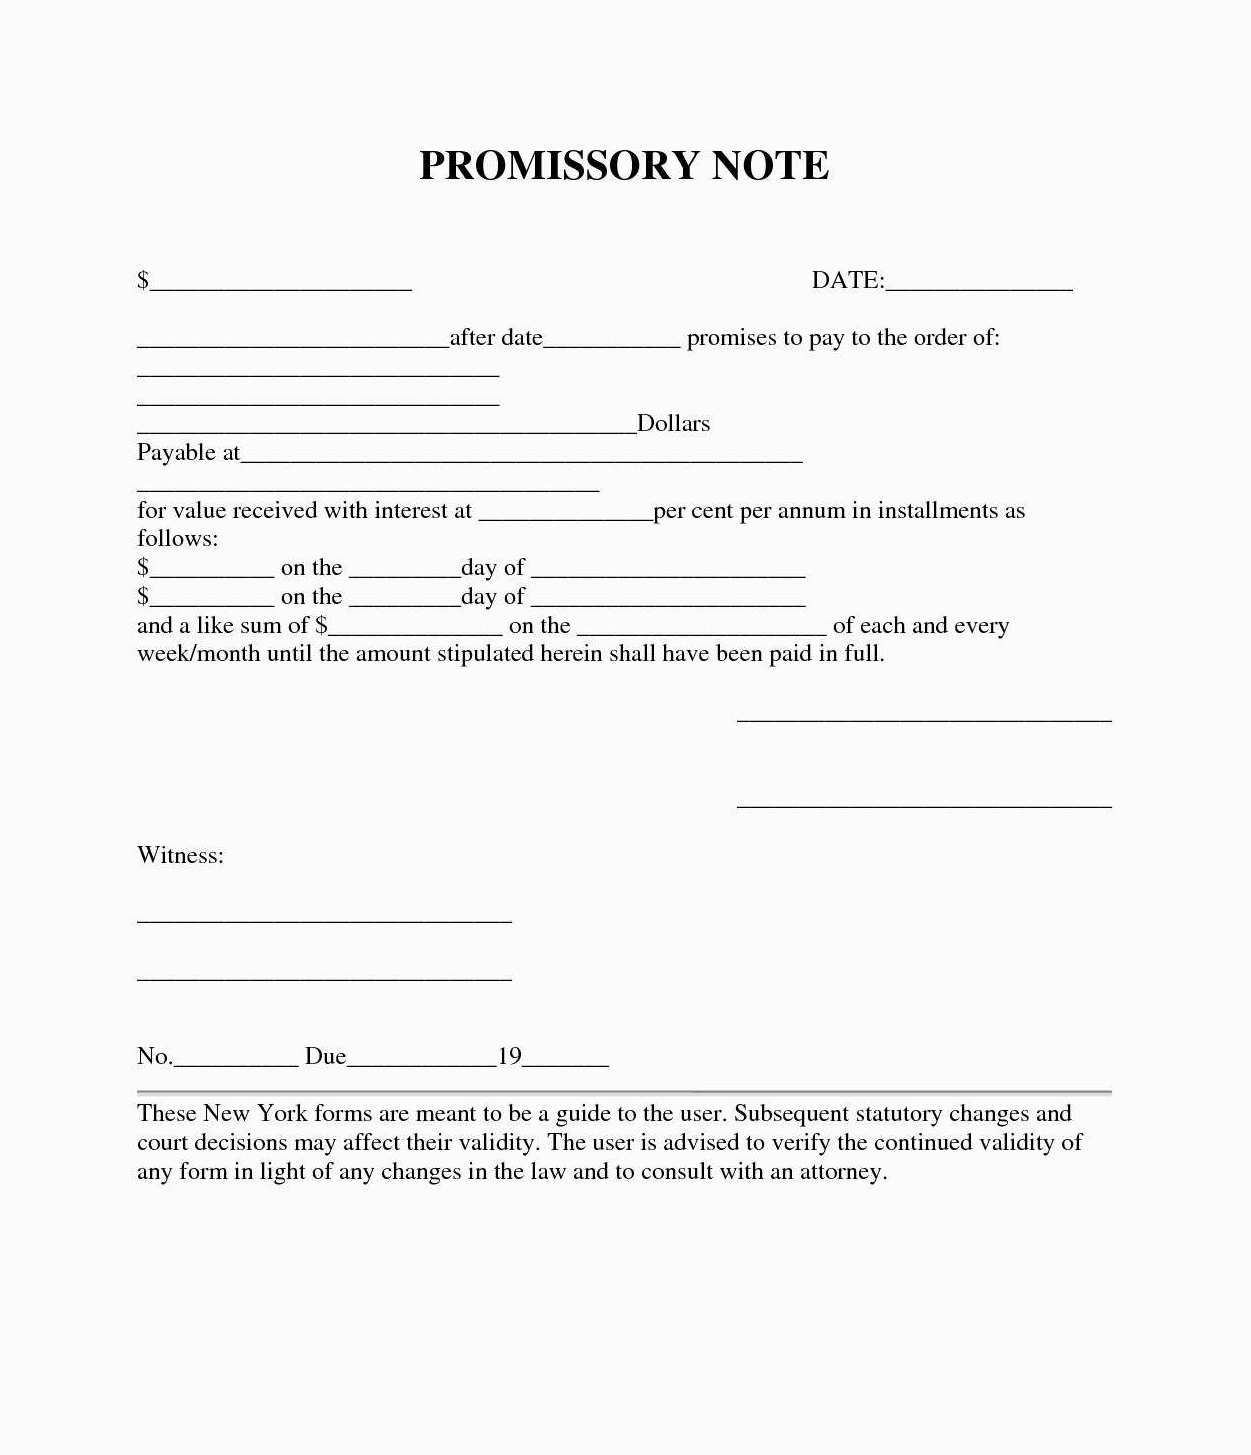 Promissory Note Free Template